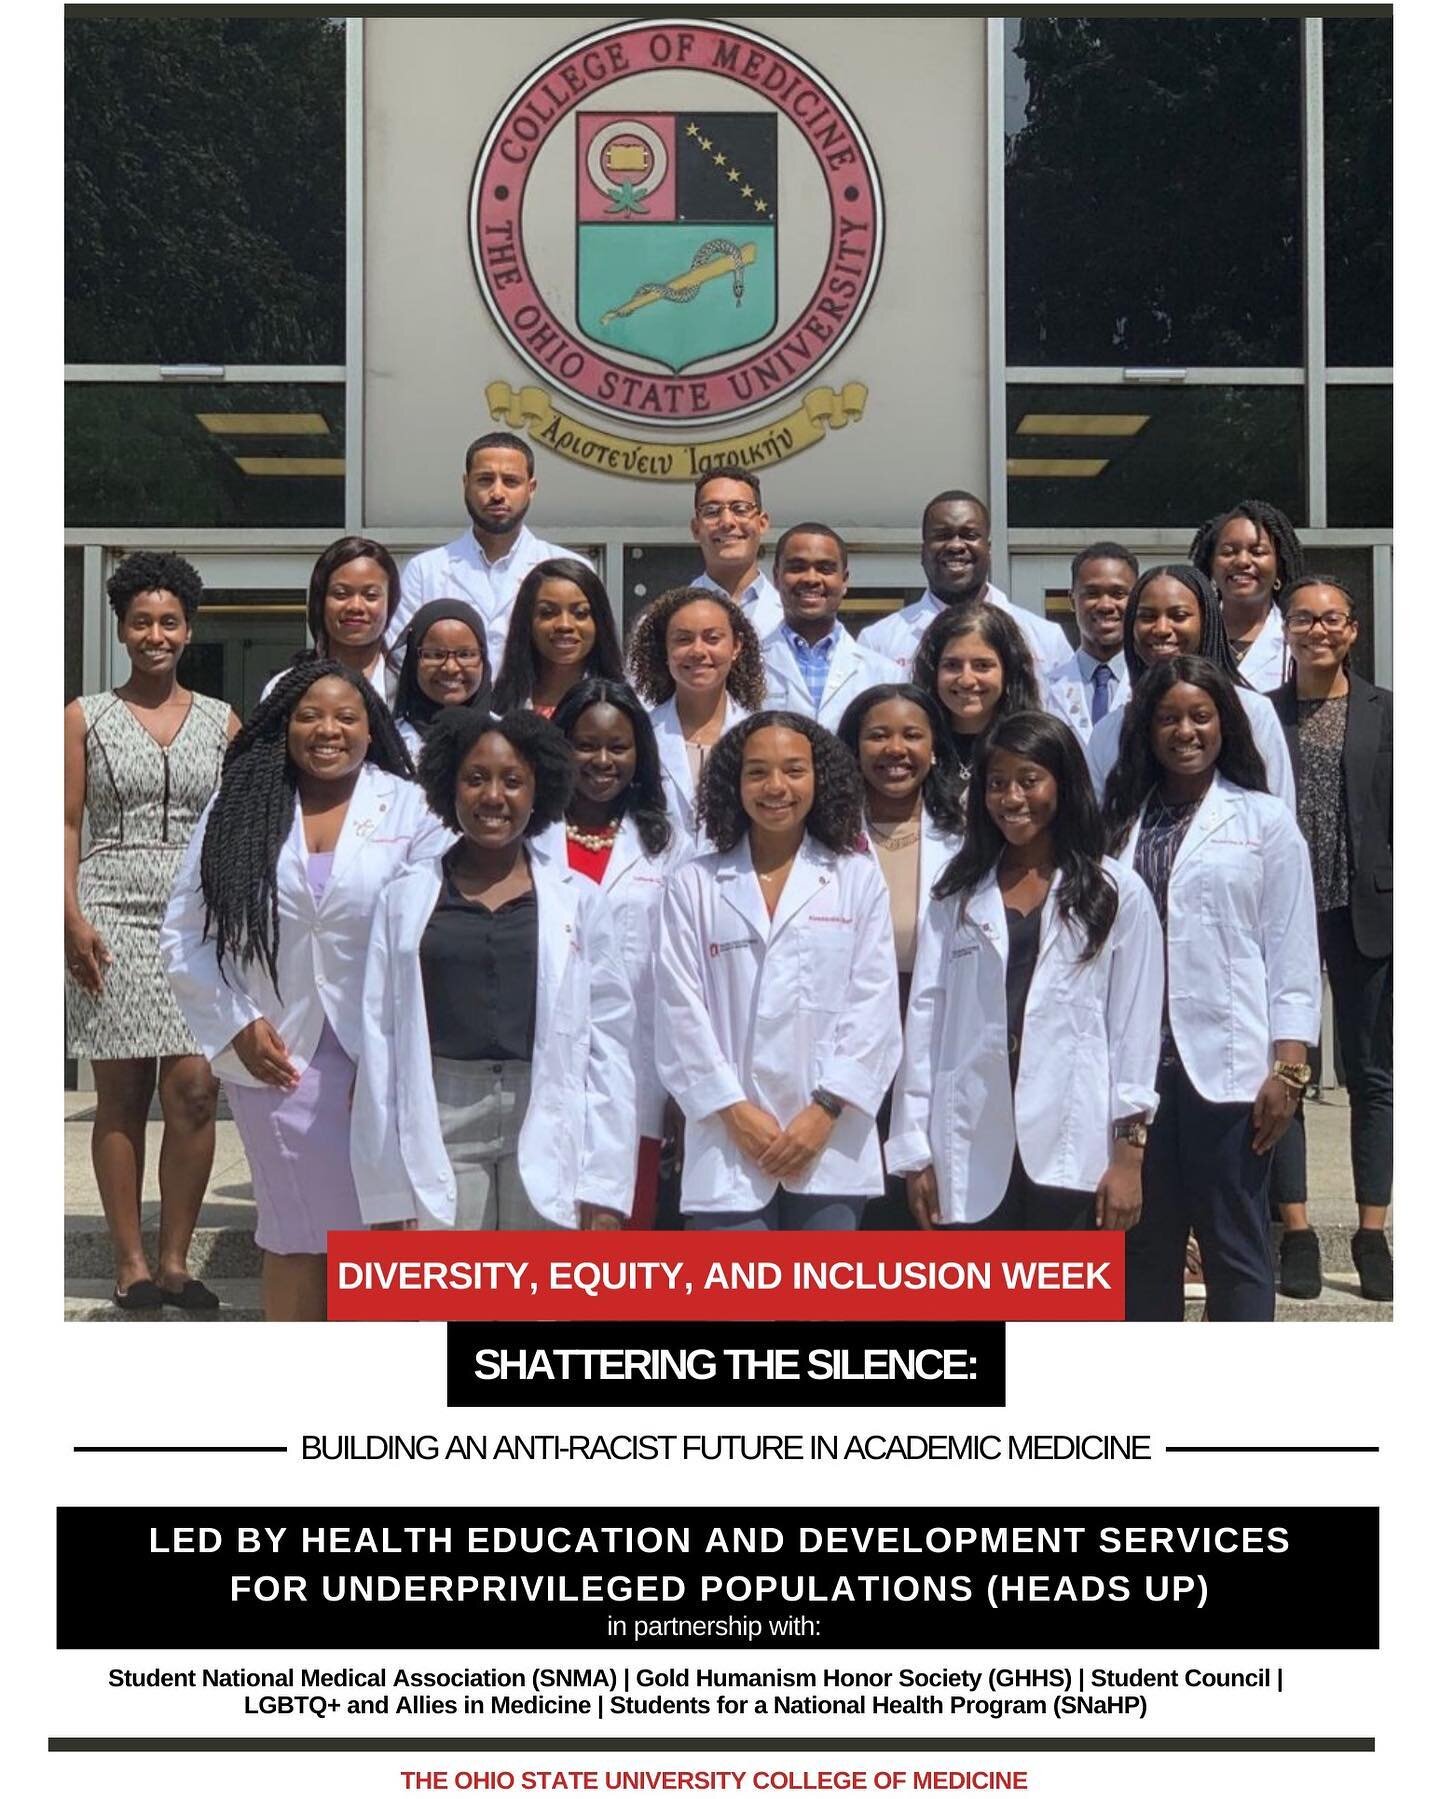 HEADS UP has organized the Diversity, Equity, and Inclusion Week: &ldquo;Shattering the Silence: Building an Anti-Racist Future in Academic Medicine&rdquo; starting on Monday, July 6th, in partnership with Student National Medical Association, Gold H